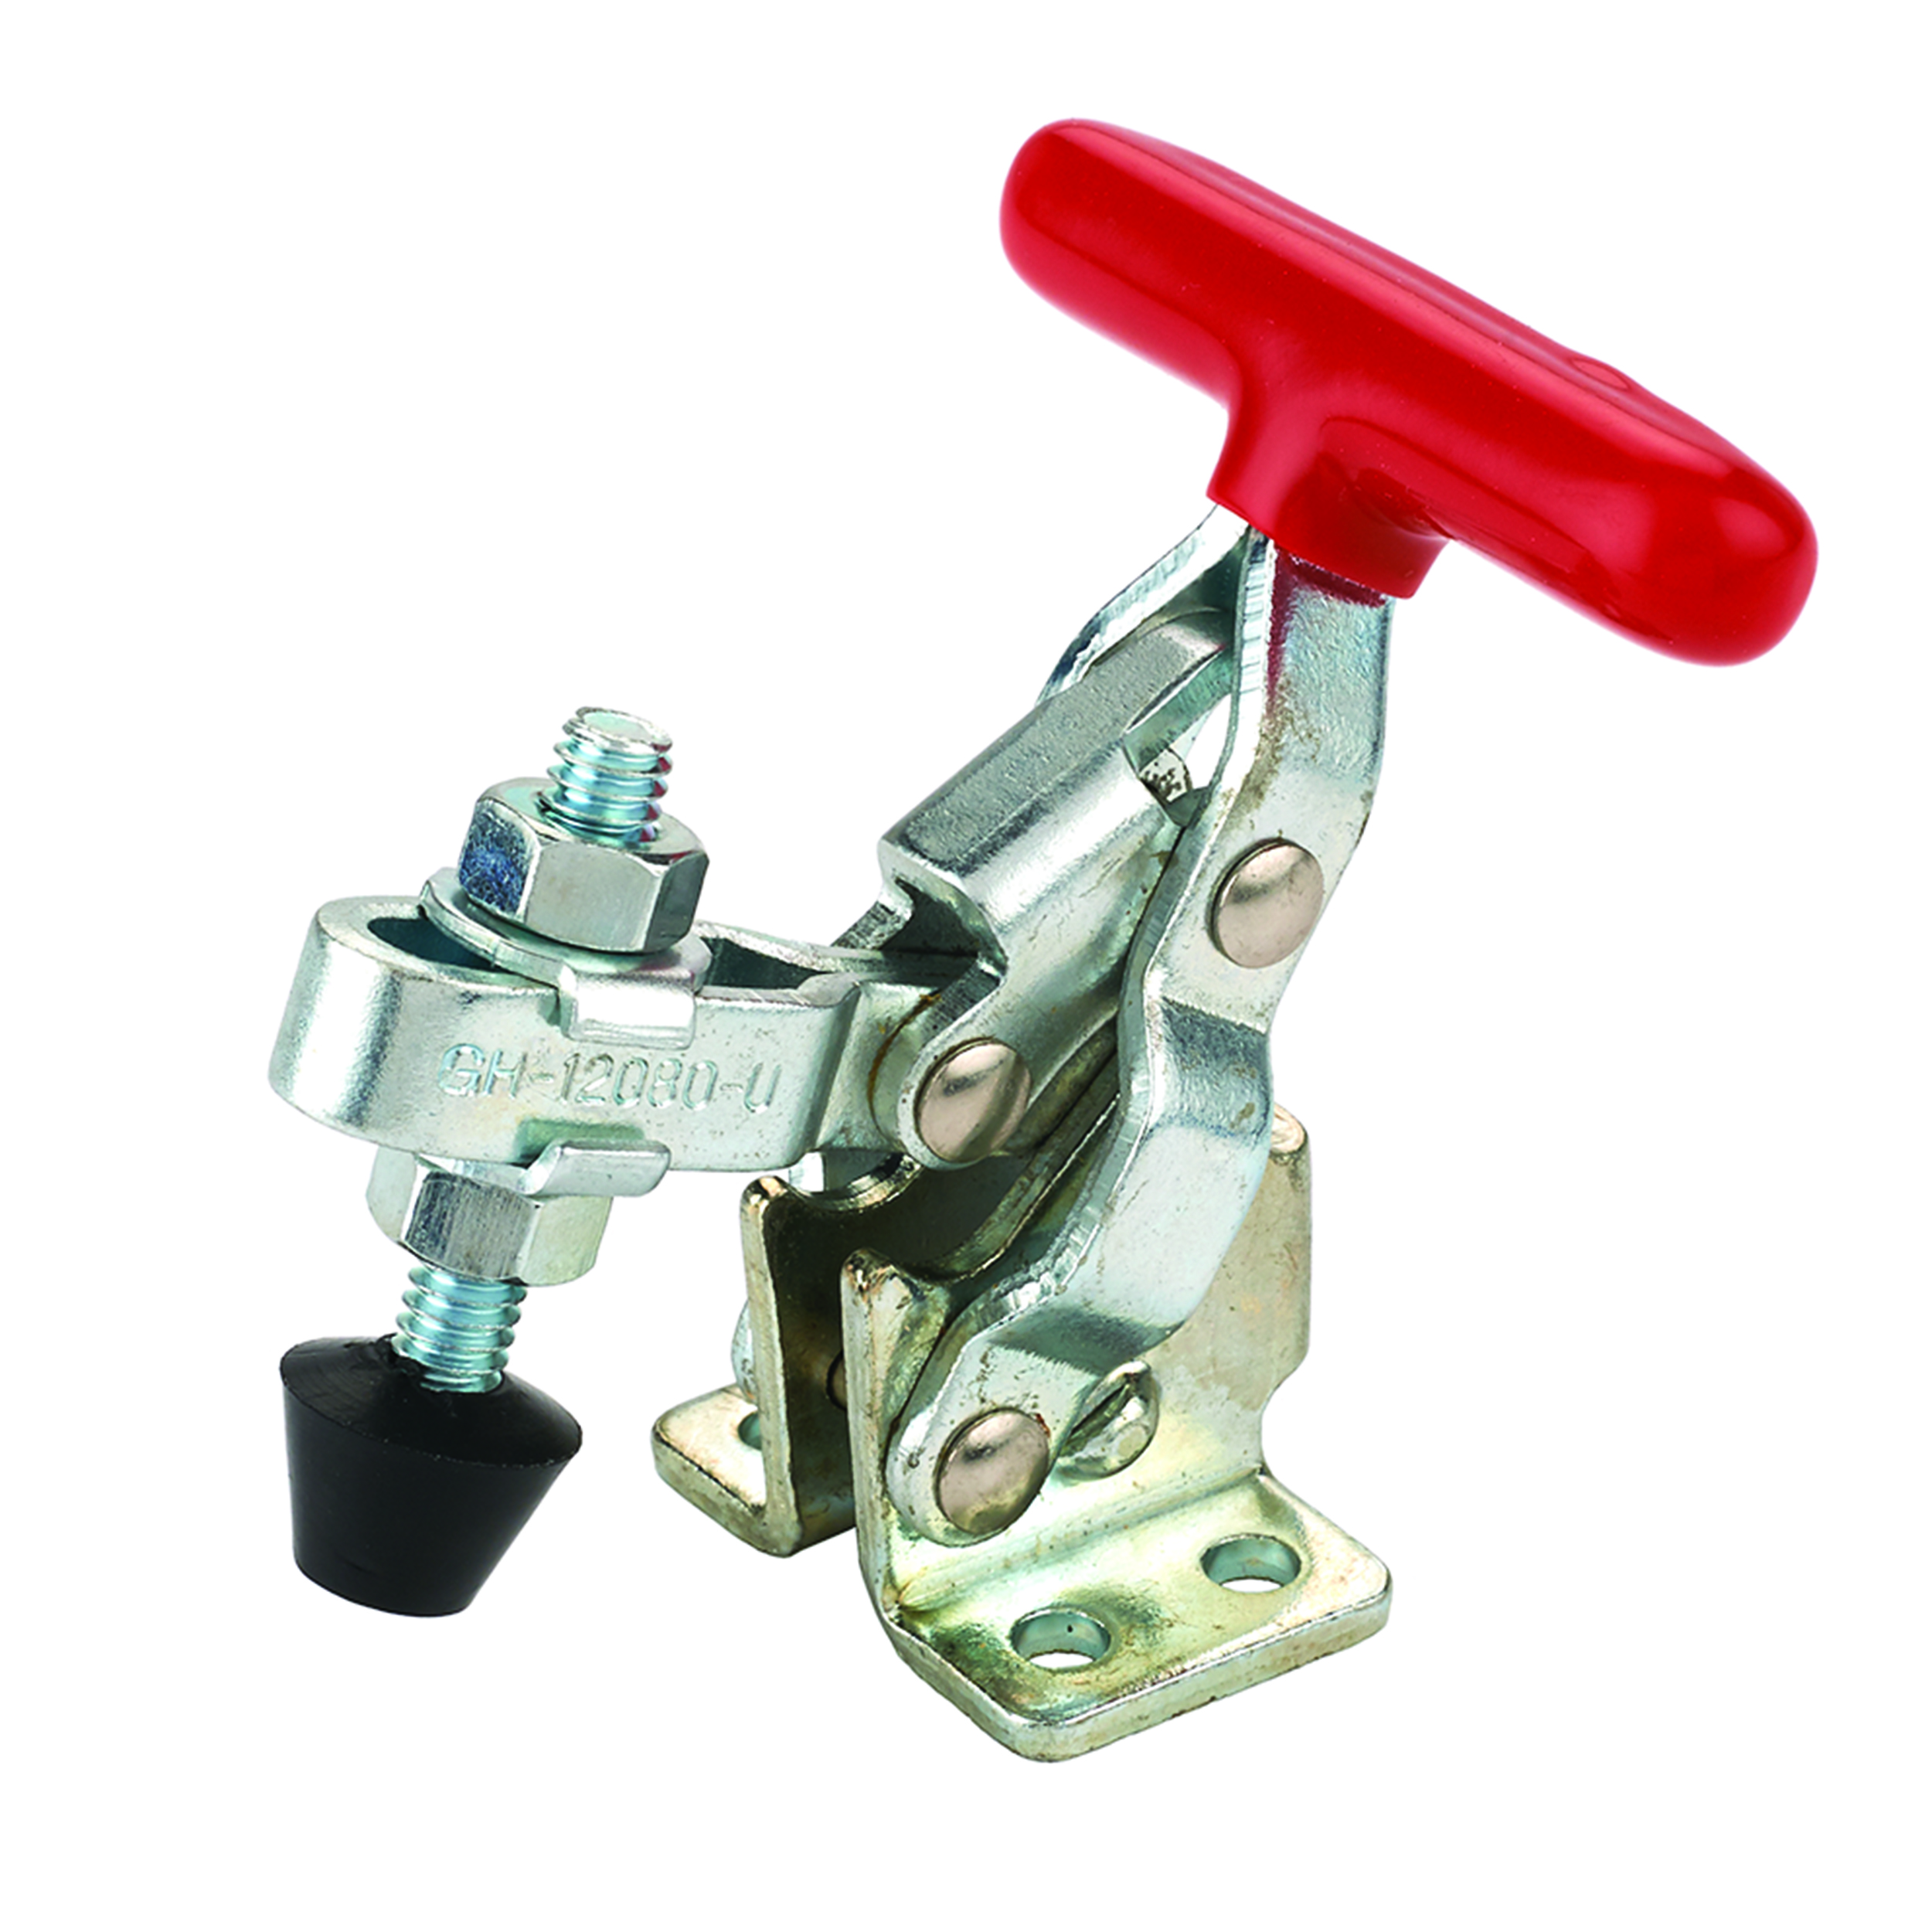 Vertical T Handle Toggle Clamp, 3" X 3", 200 Lb. Capacity